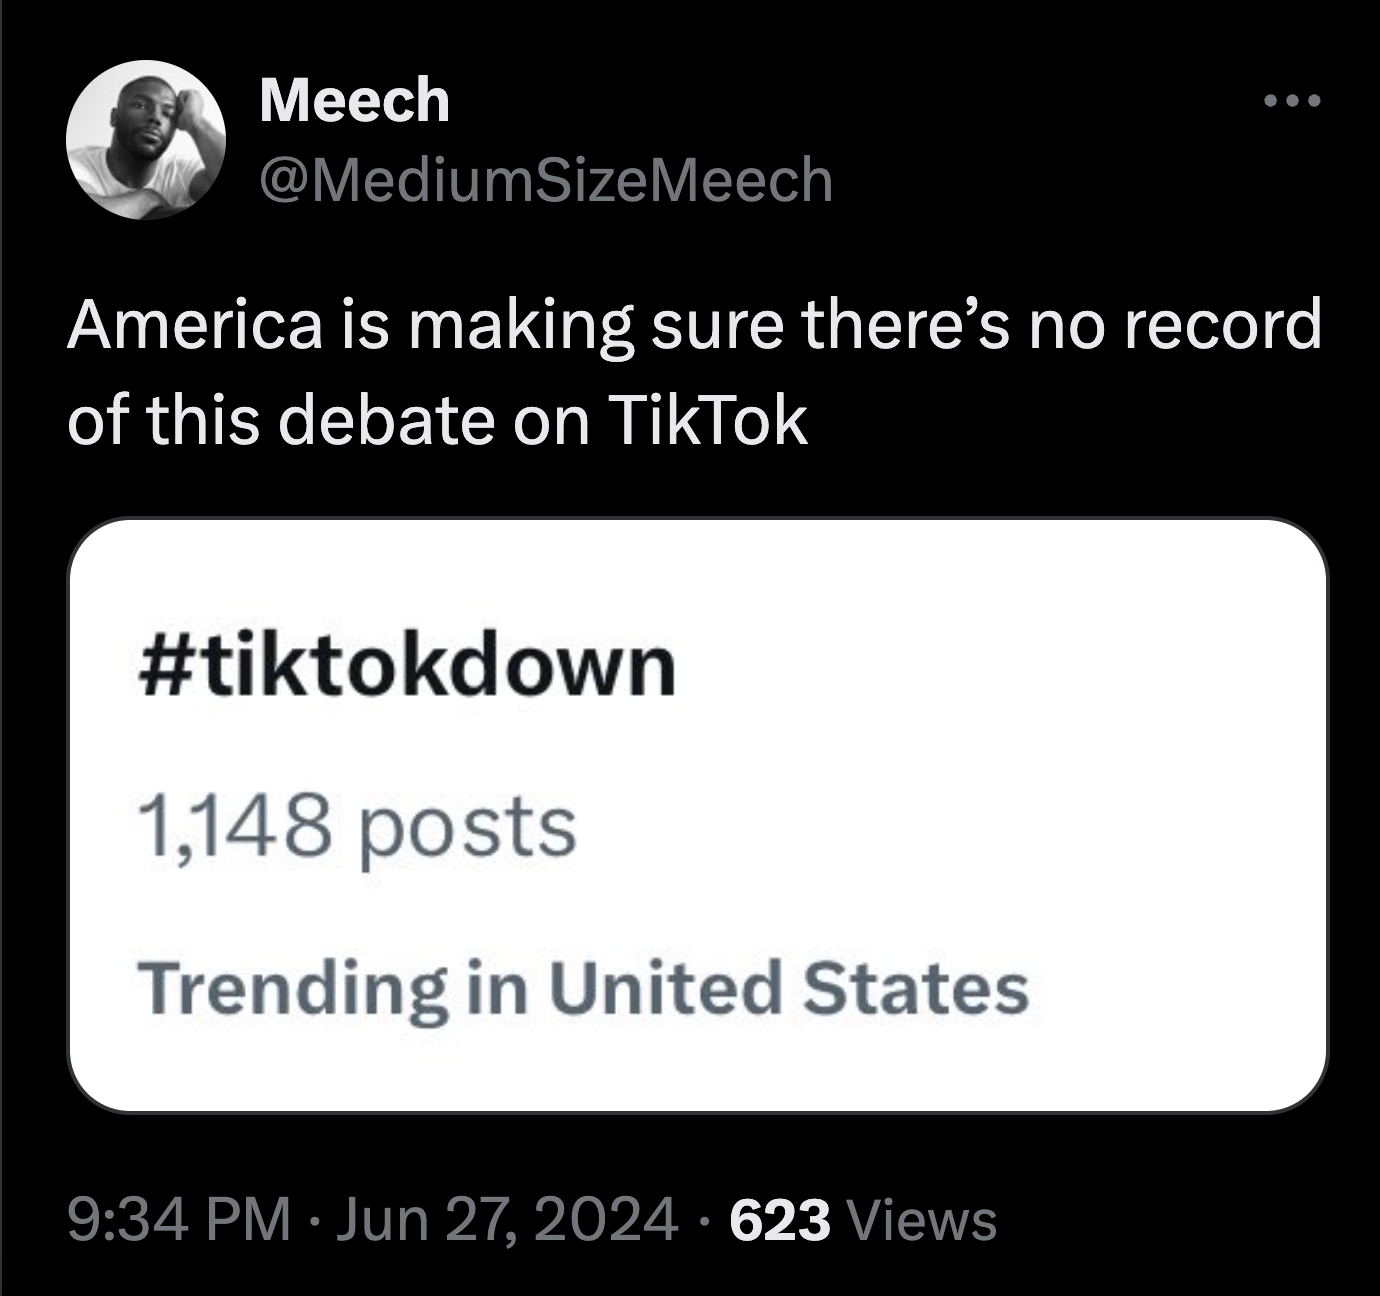 screenshot - Meech America is making sure there's no record of this debate on TikTok 1,148 posts Trending in United States 623 Views